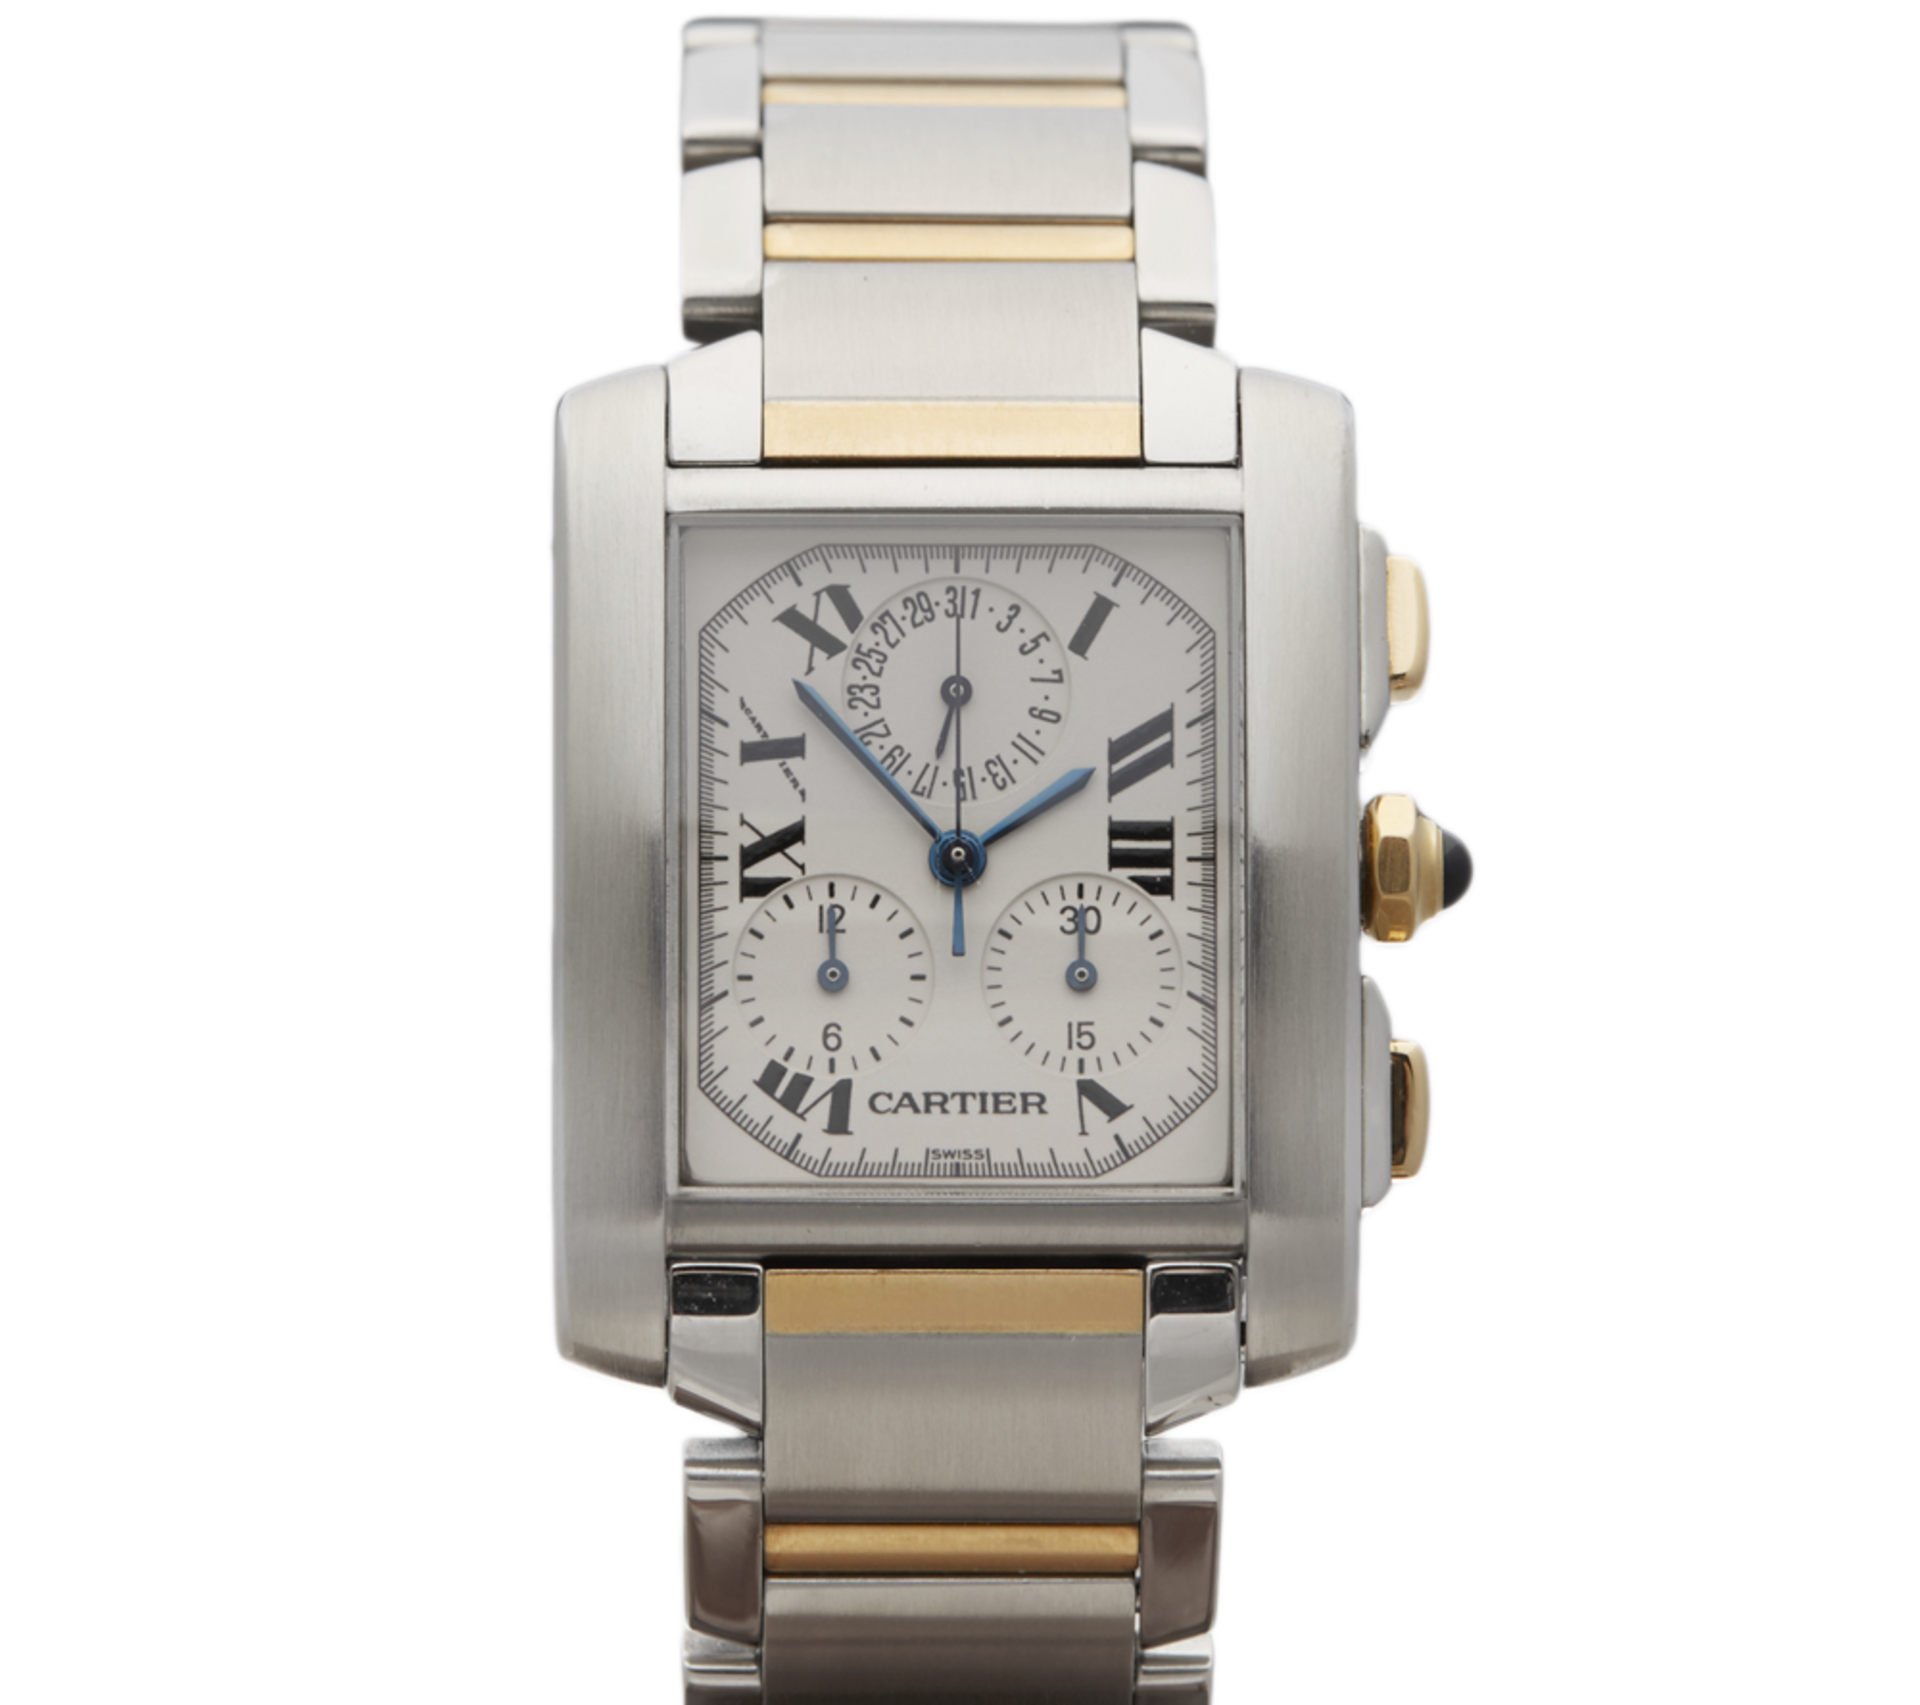 Cartier Tank Francaise Chronoreflex 28mm Stainless Steel & 18k Yellow Gold 2303 or W51004Q4 - Image 2 of 10